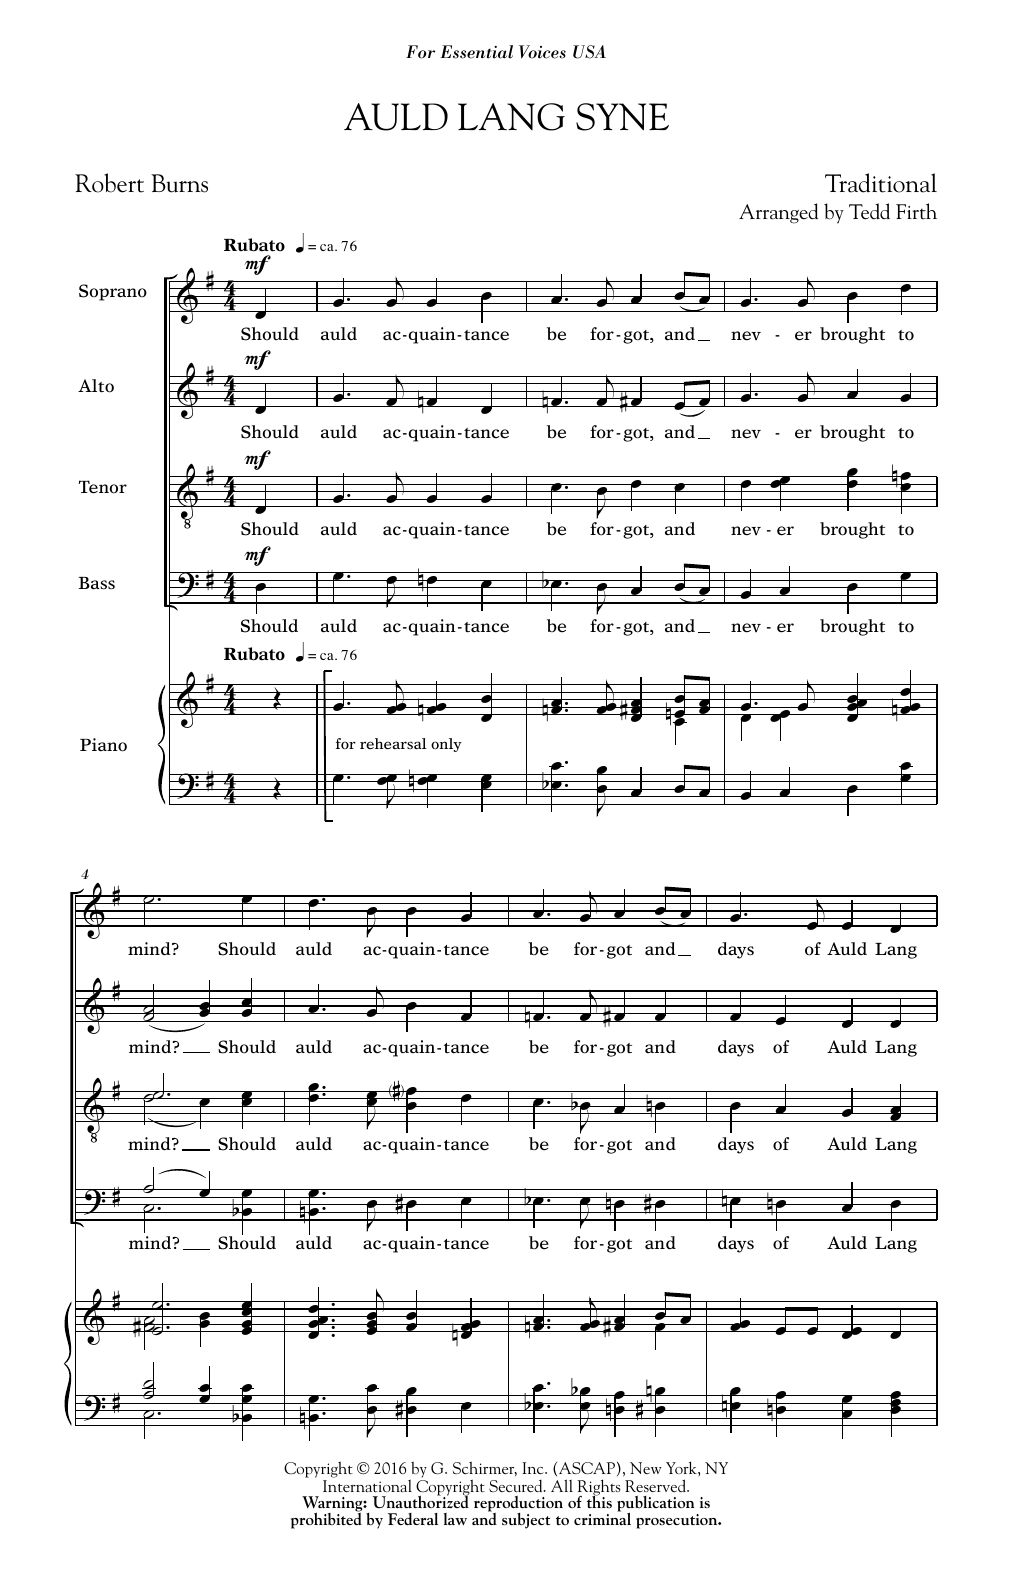 Download Tedd Firth Auld Lang Syne Sheet Music